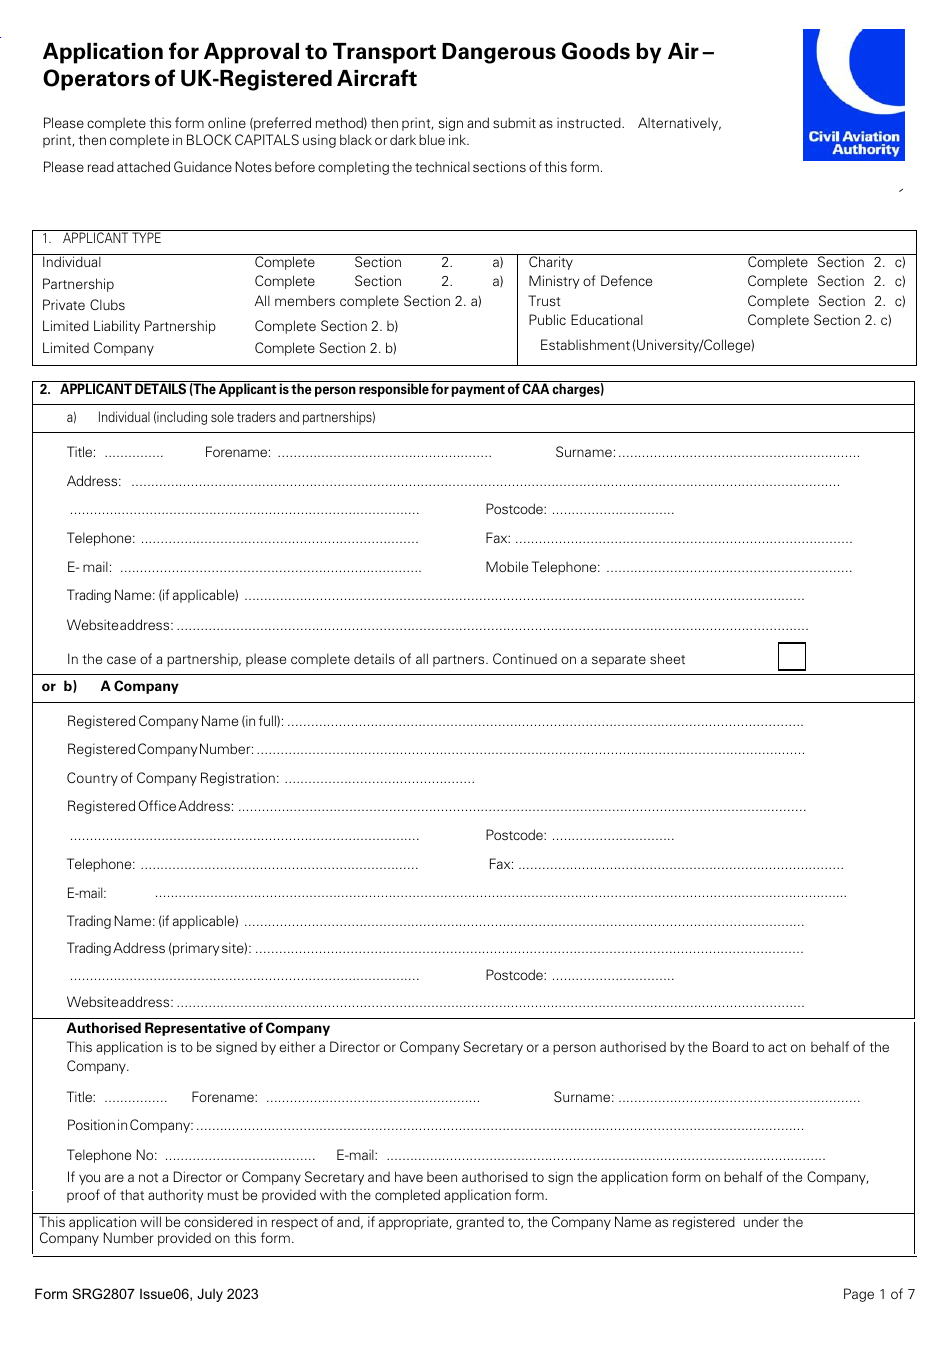 Form SRG2807 Application for Approval to Transport Dangerous Goods by Air - Operators of UK-Registered Aircraft - United Kingdom, Page 1